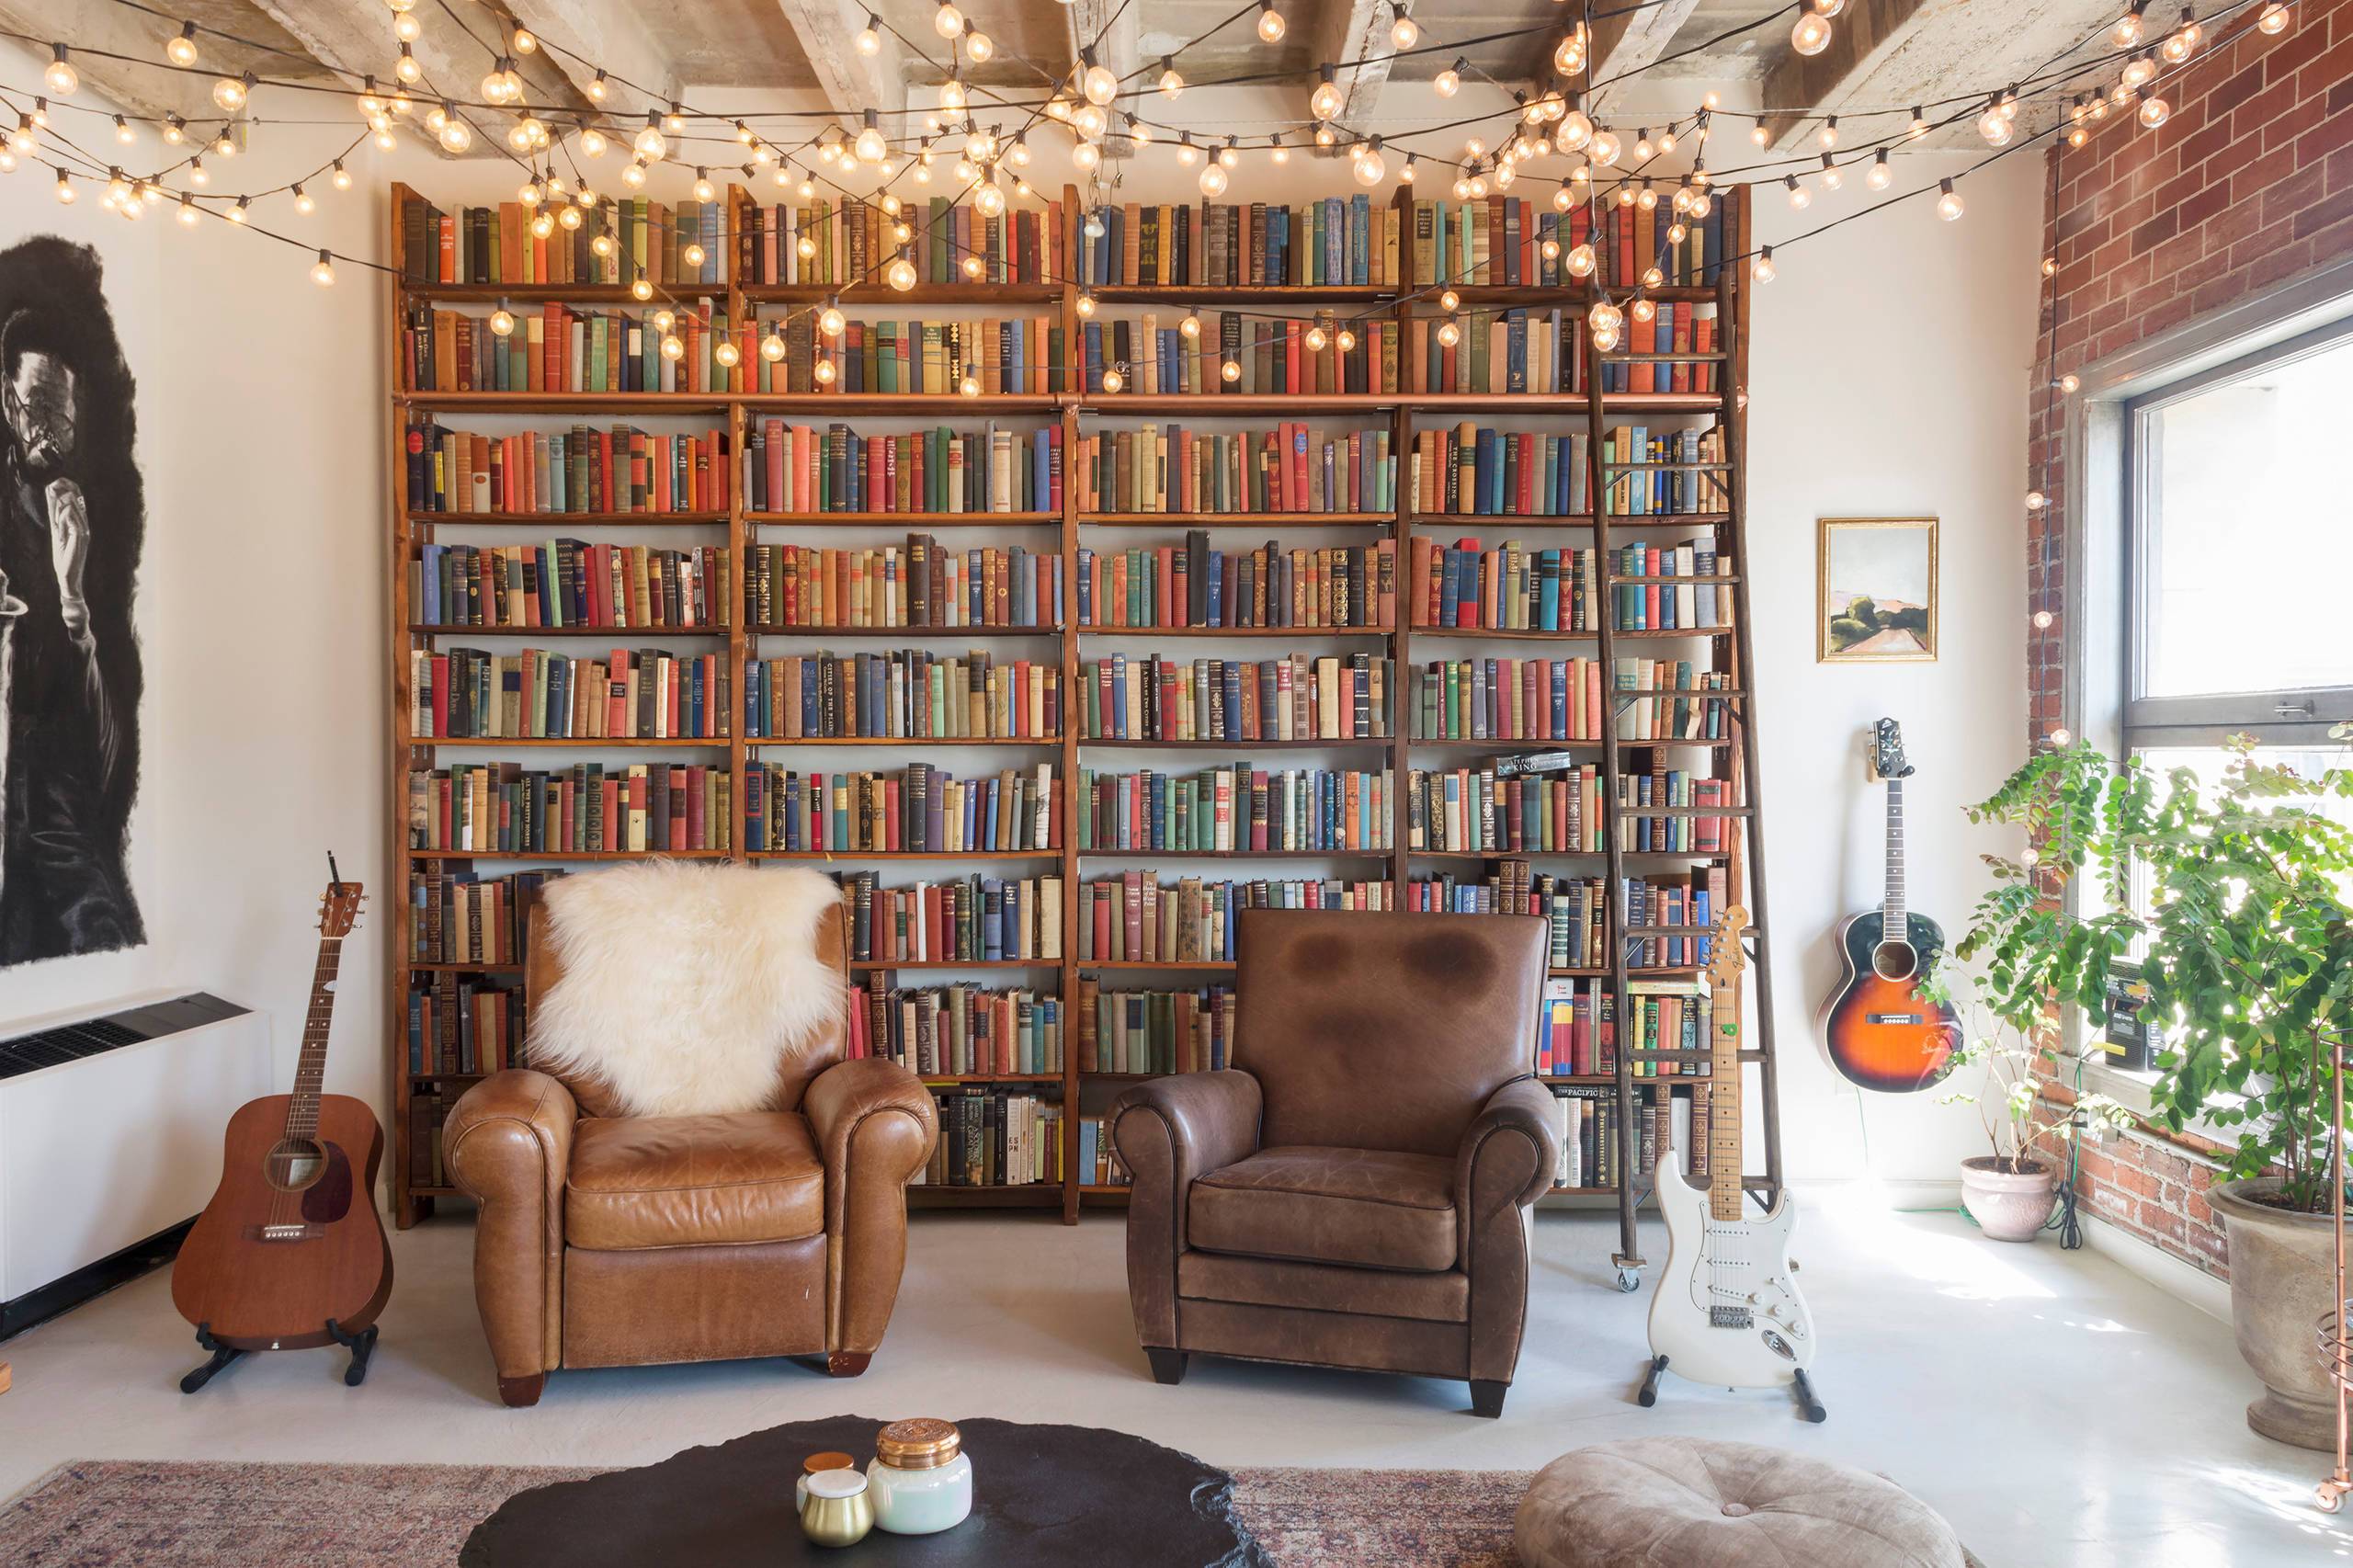 Charming living room (from Houzz)